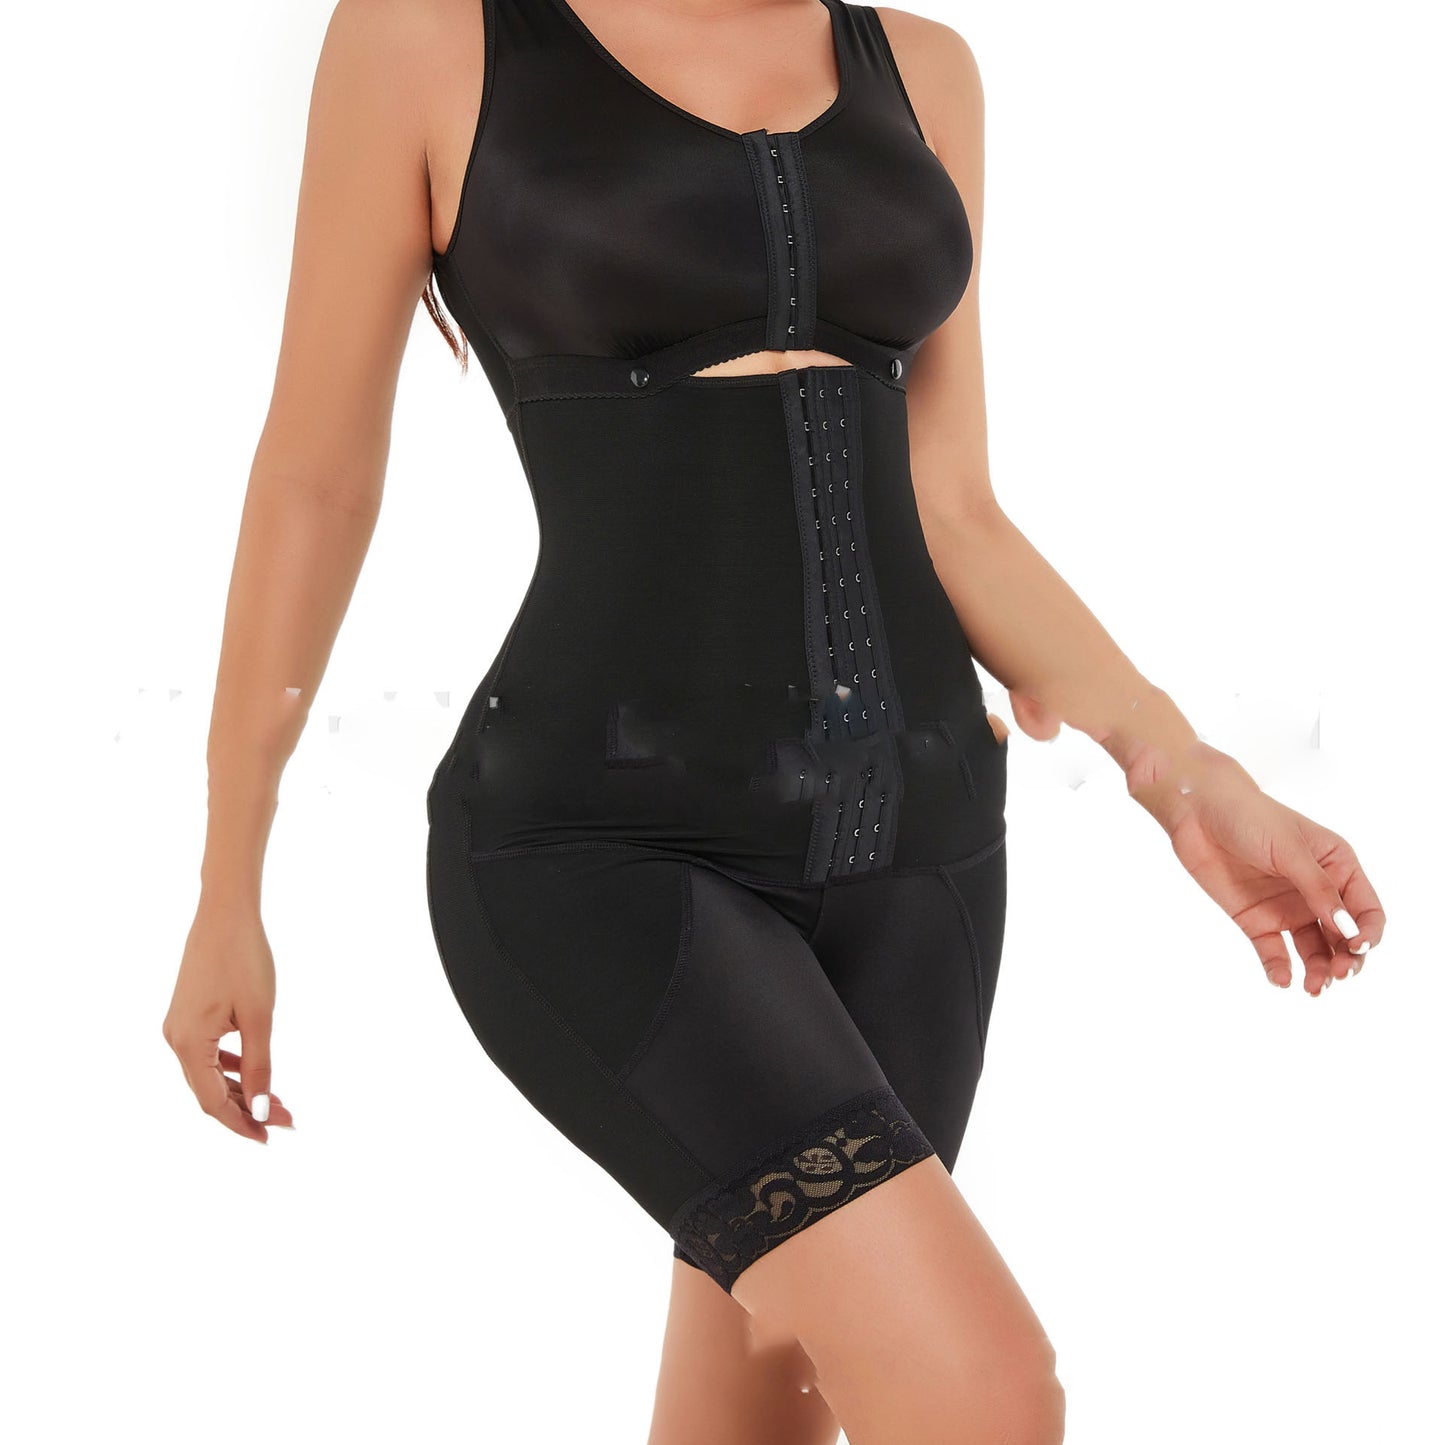 Thin Breasted One-piece Body Shaper